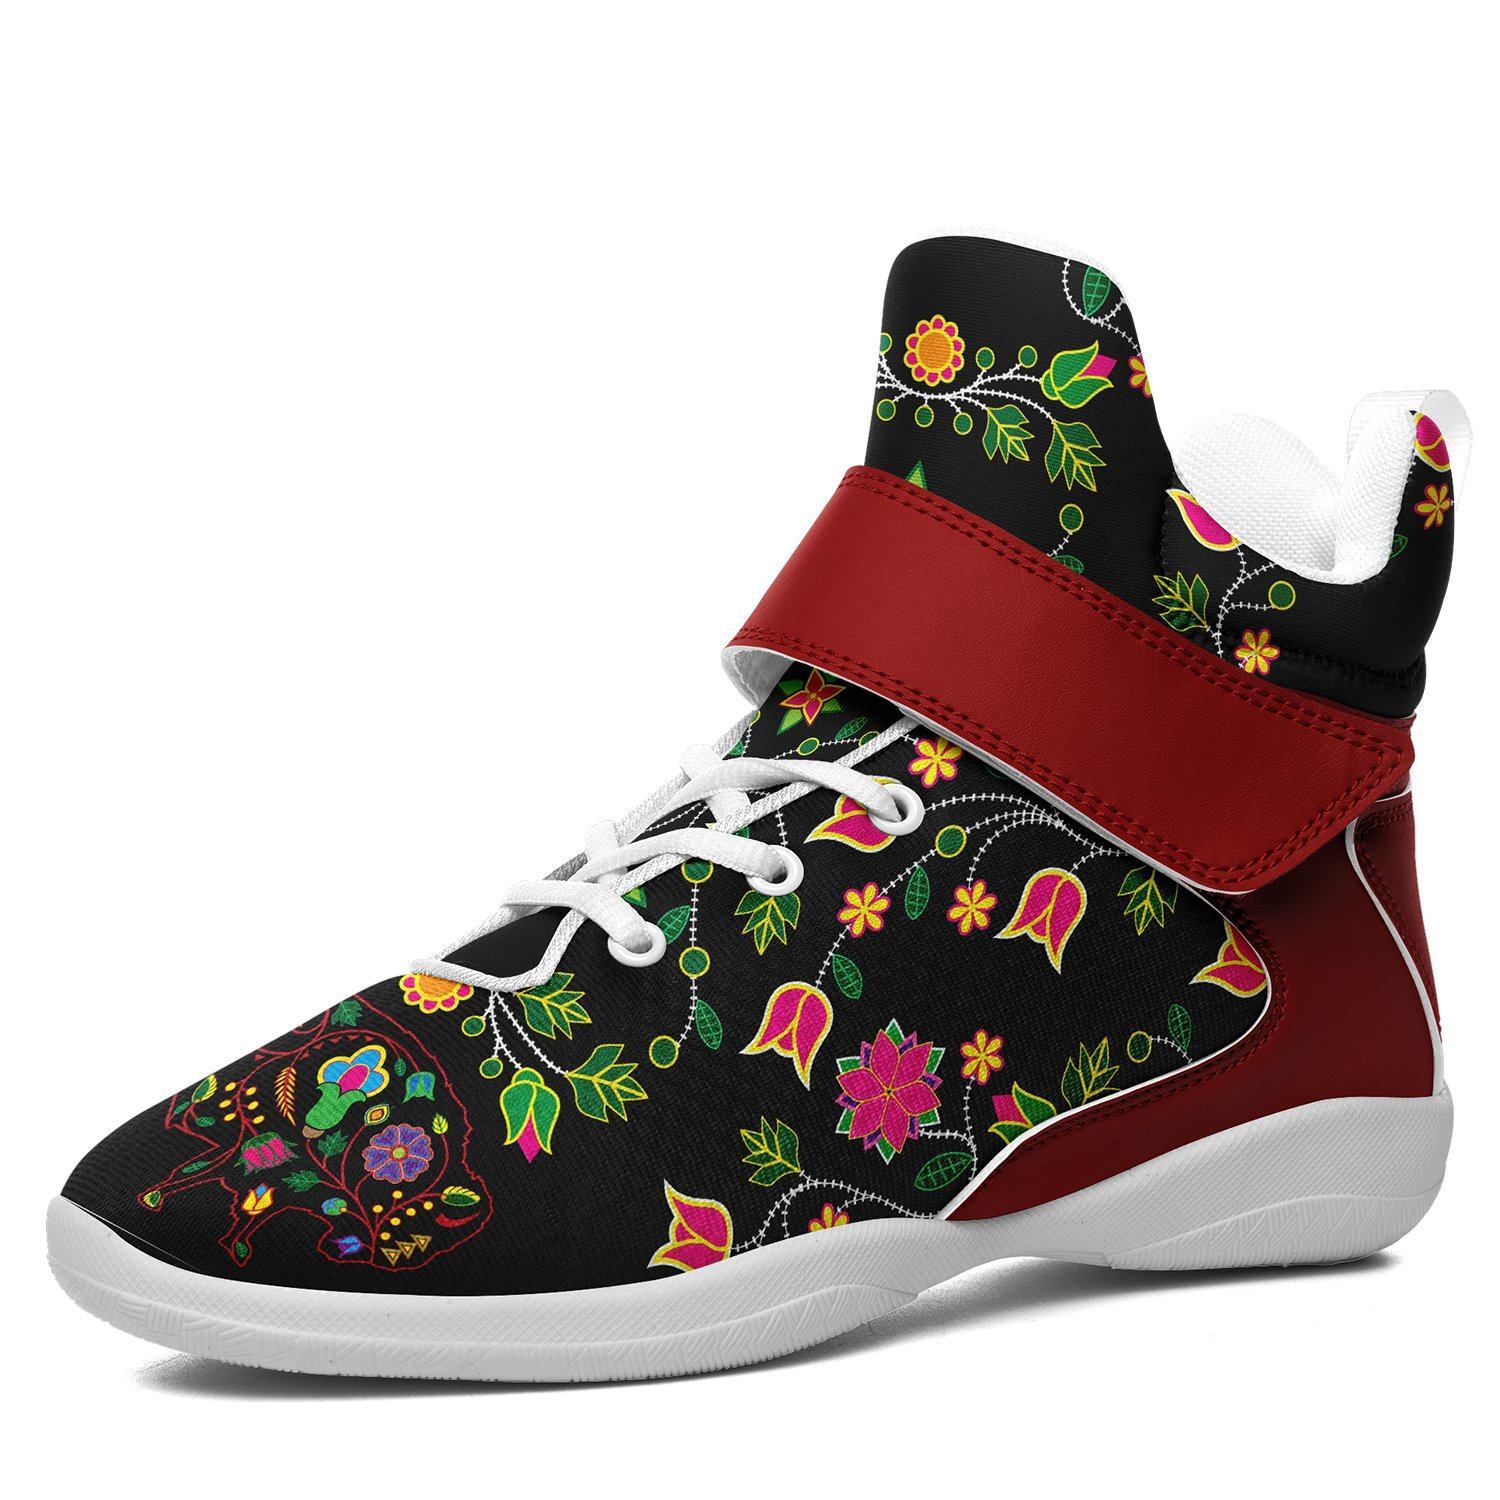 Floral Buffalo Ipottaa Basketball / Sport High Top Shoes - White Sole 49 Dzine US Men 7 / EUR 40 White Sole with Dark Red Strap 